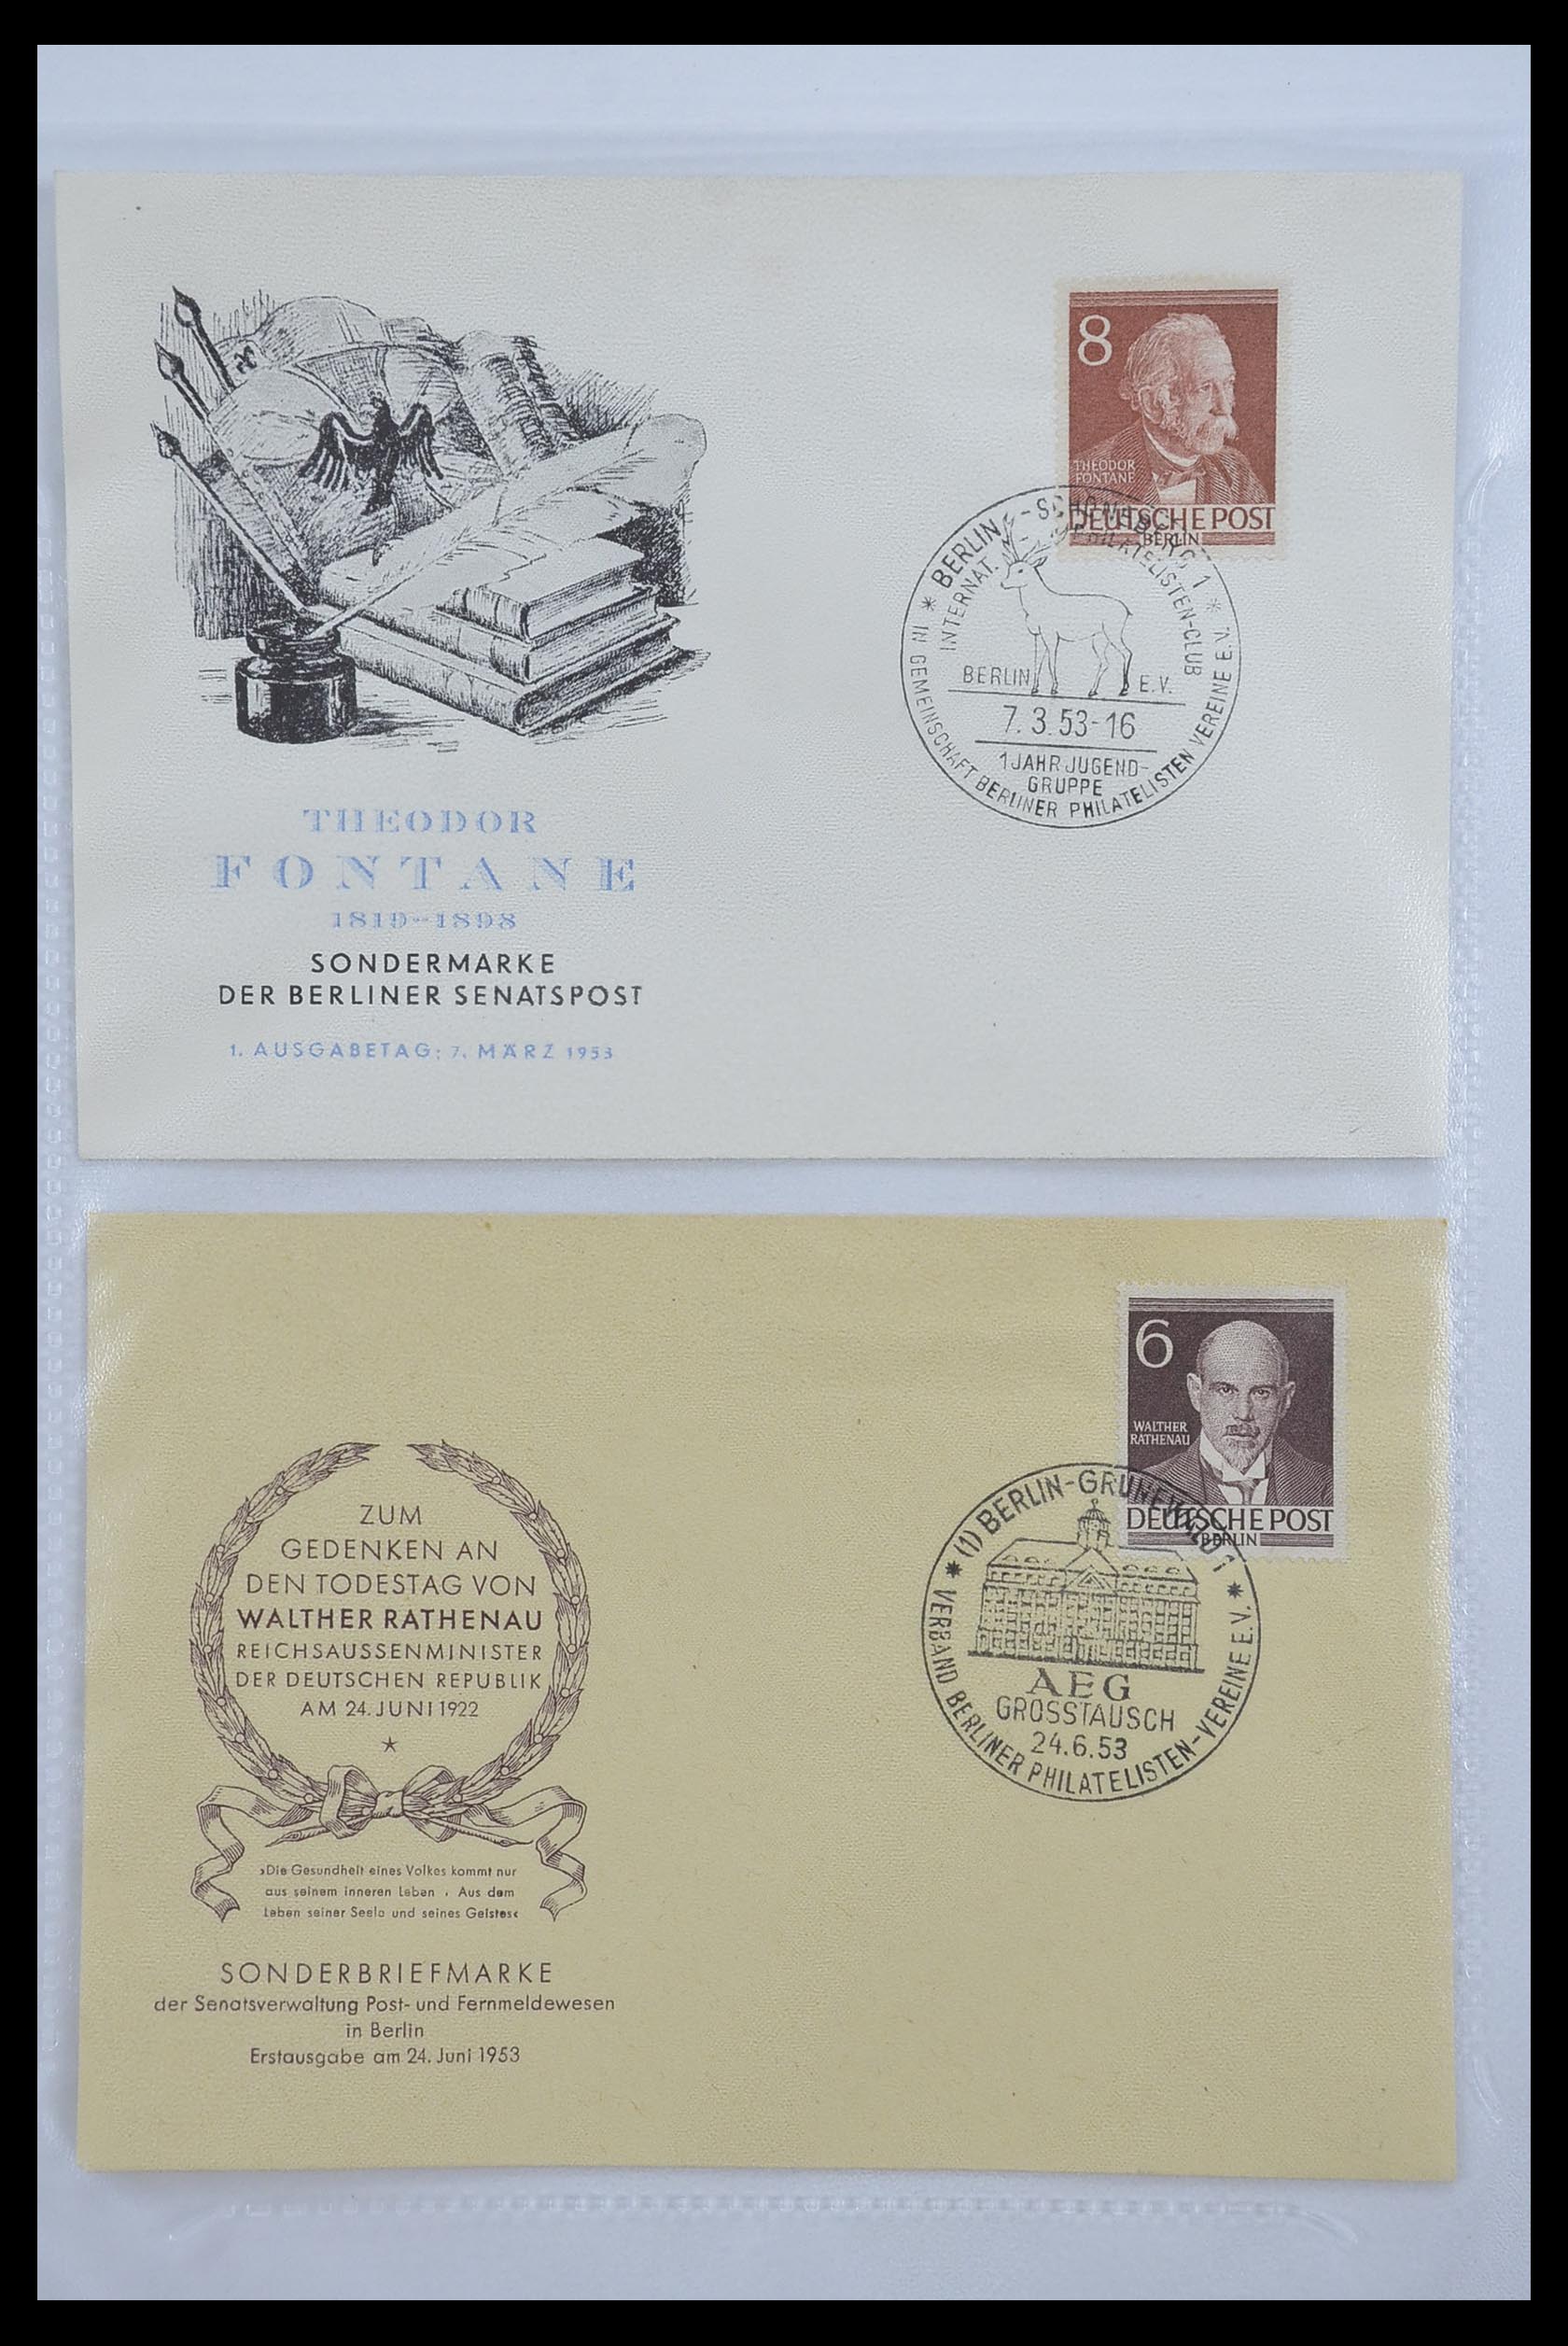 33290 057 - Stamp collection 33290 Berlin covers 1948-1957.